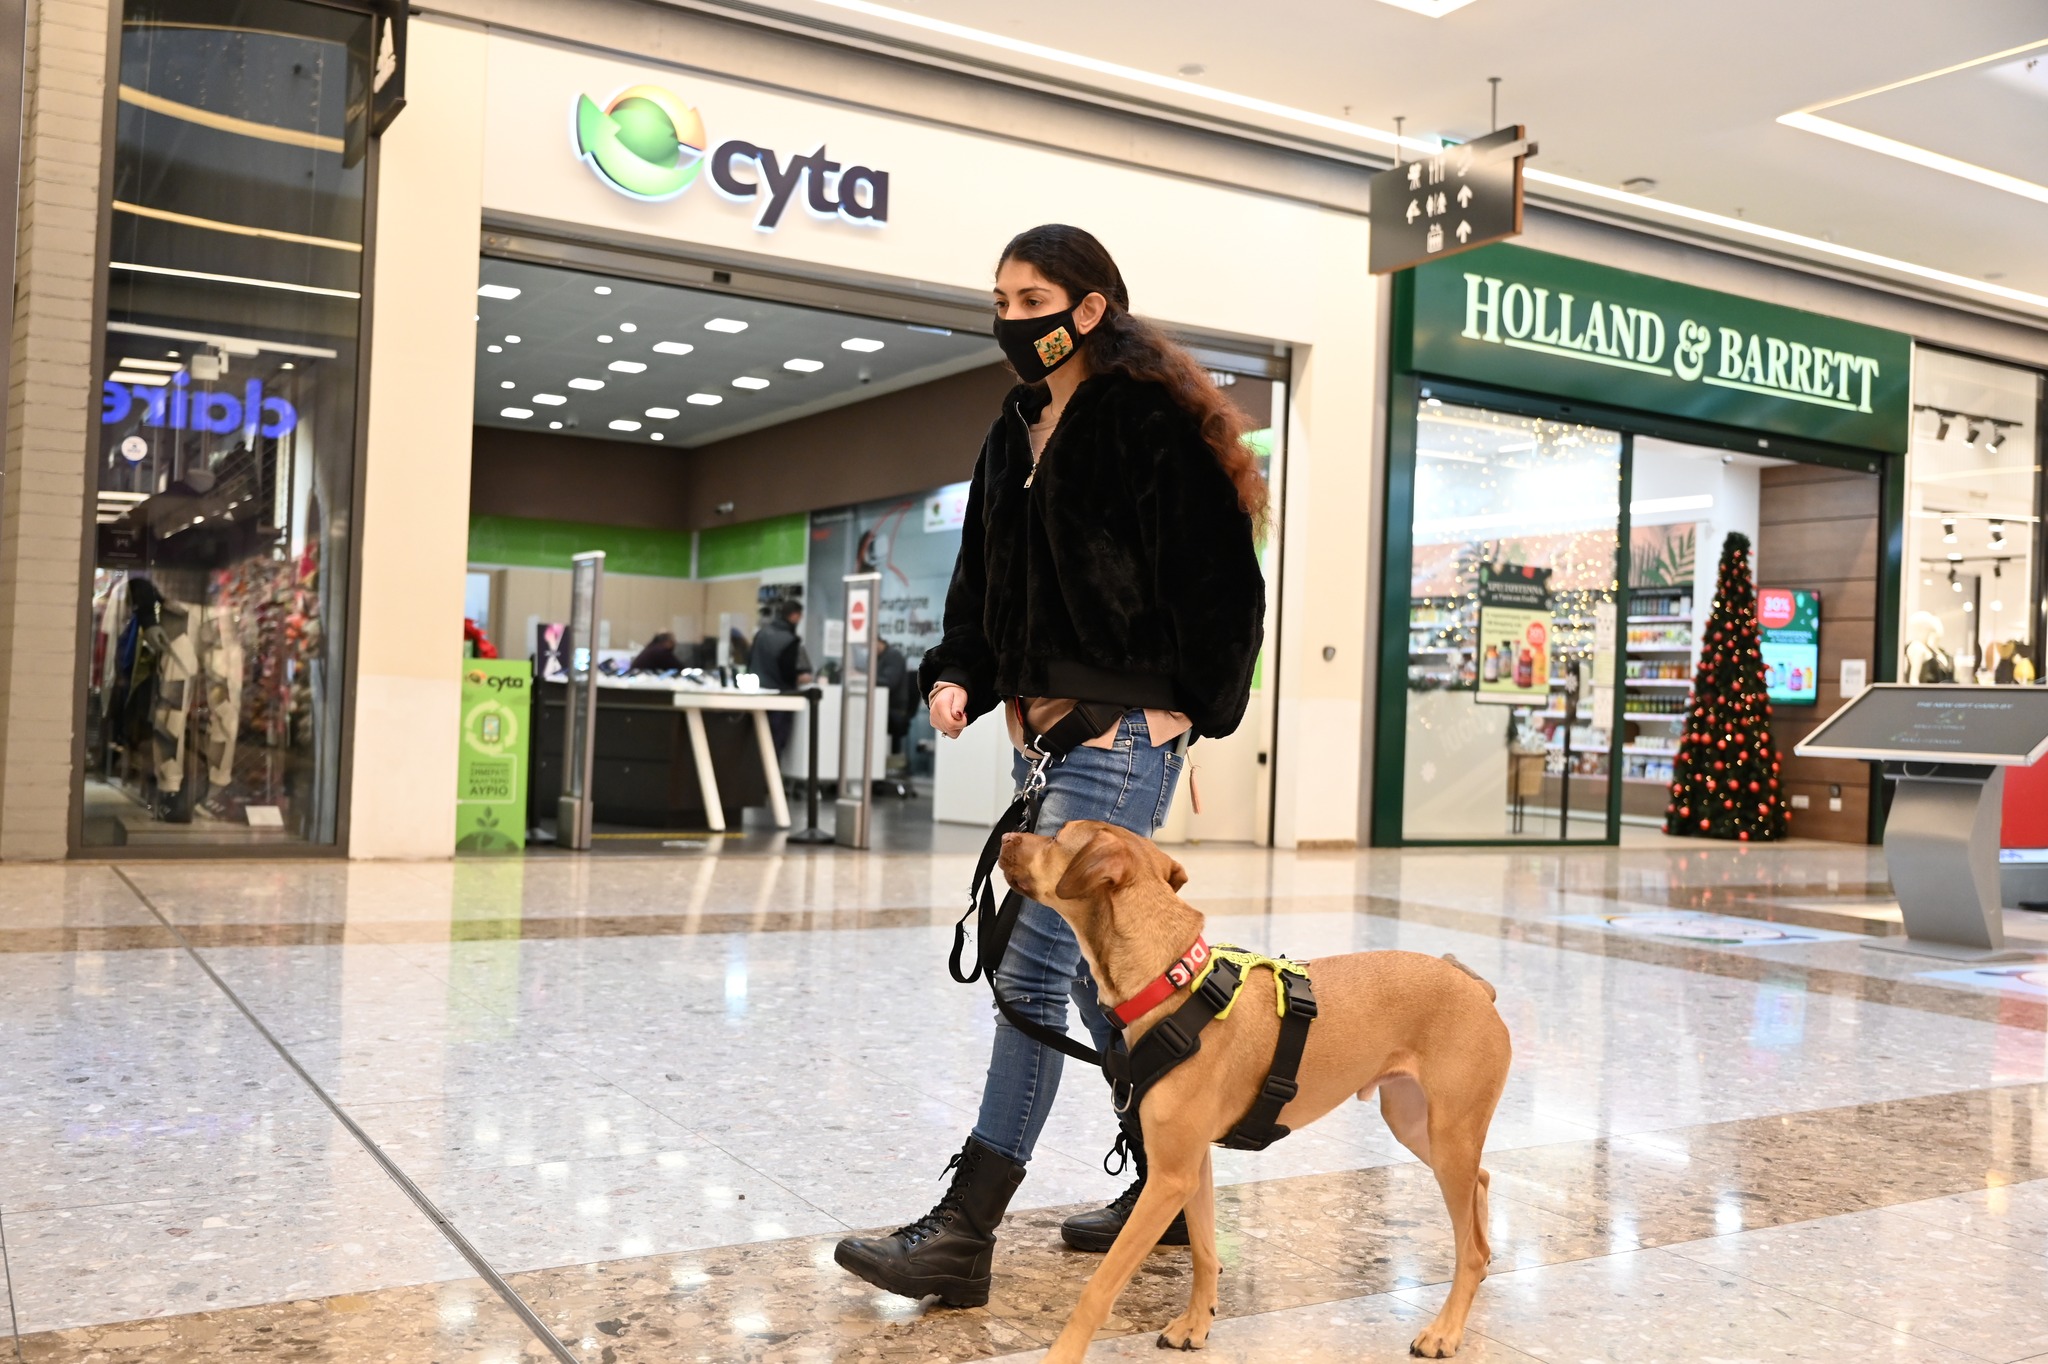 feature bejay marilena and her assistance dog joey enjoying a trip to the mall of cyprus